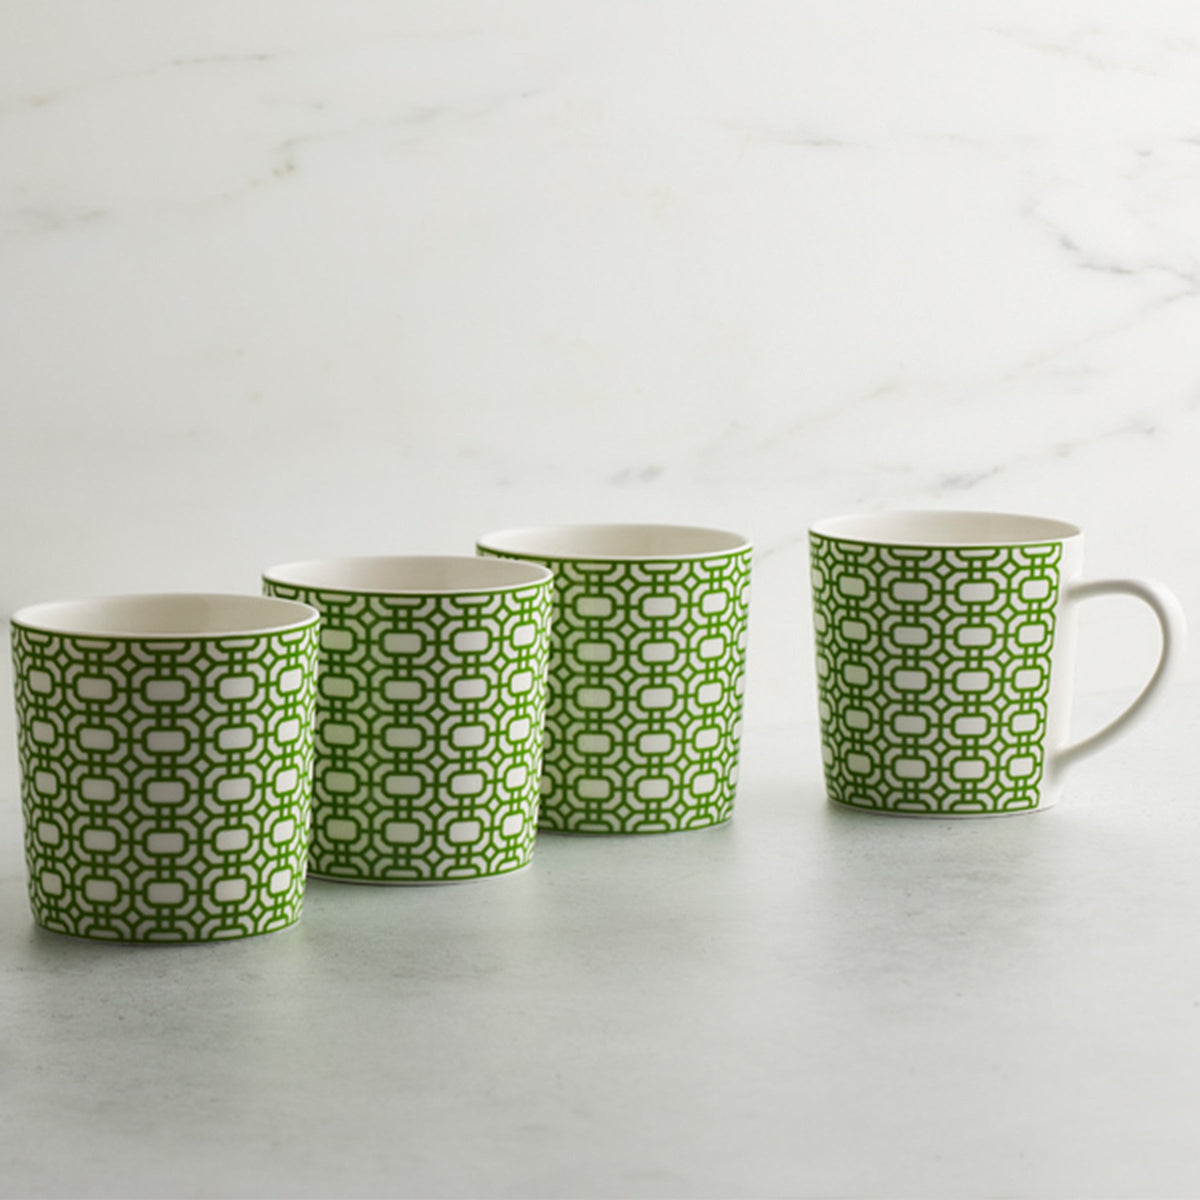 Four Newport Garden Gate Verde Mugs by Caskata Artisanal Home are aligned in a row on a light gray surface with a white marble background.